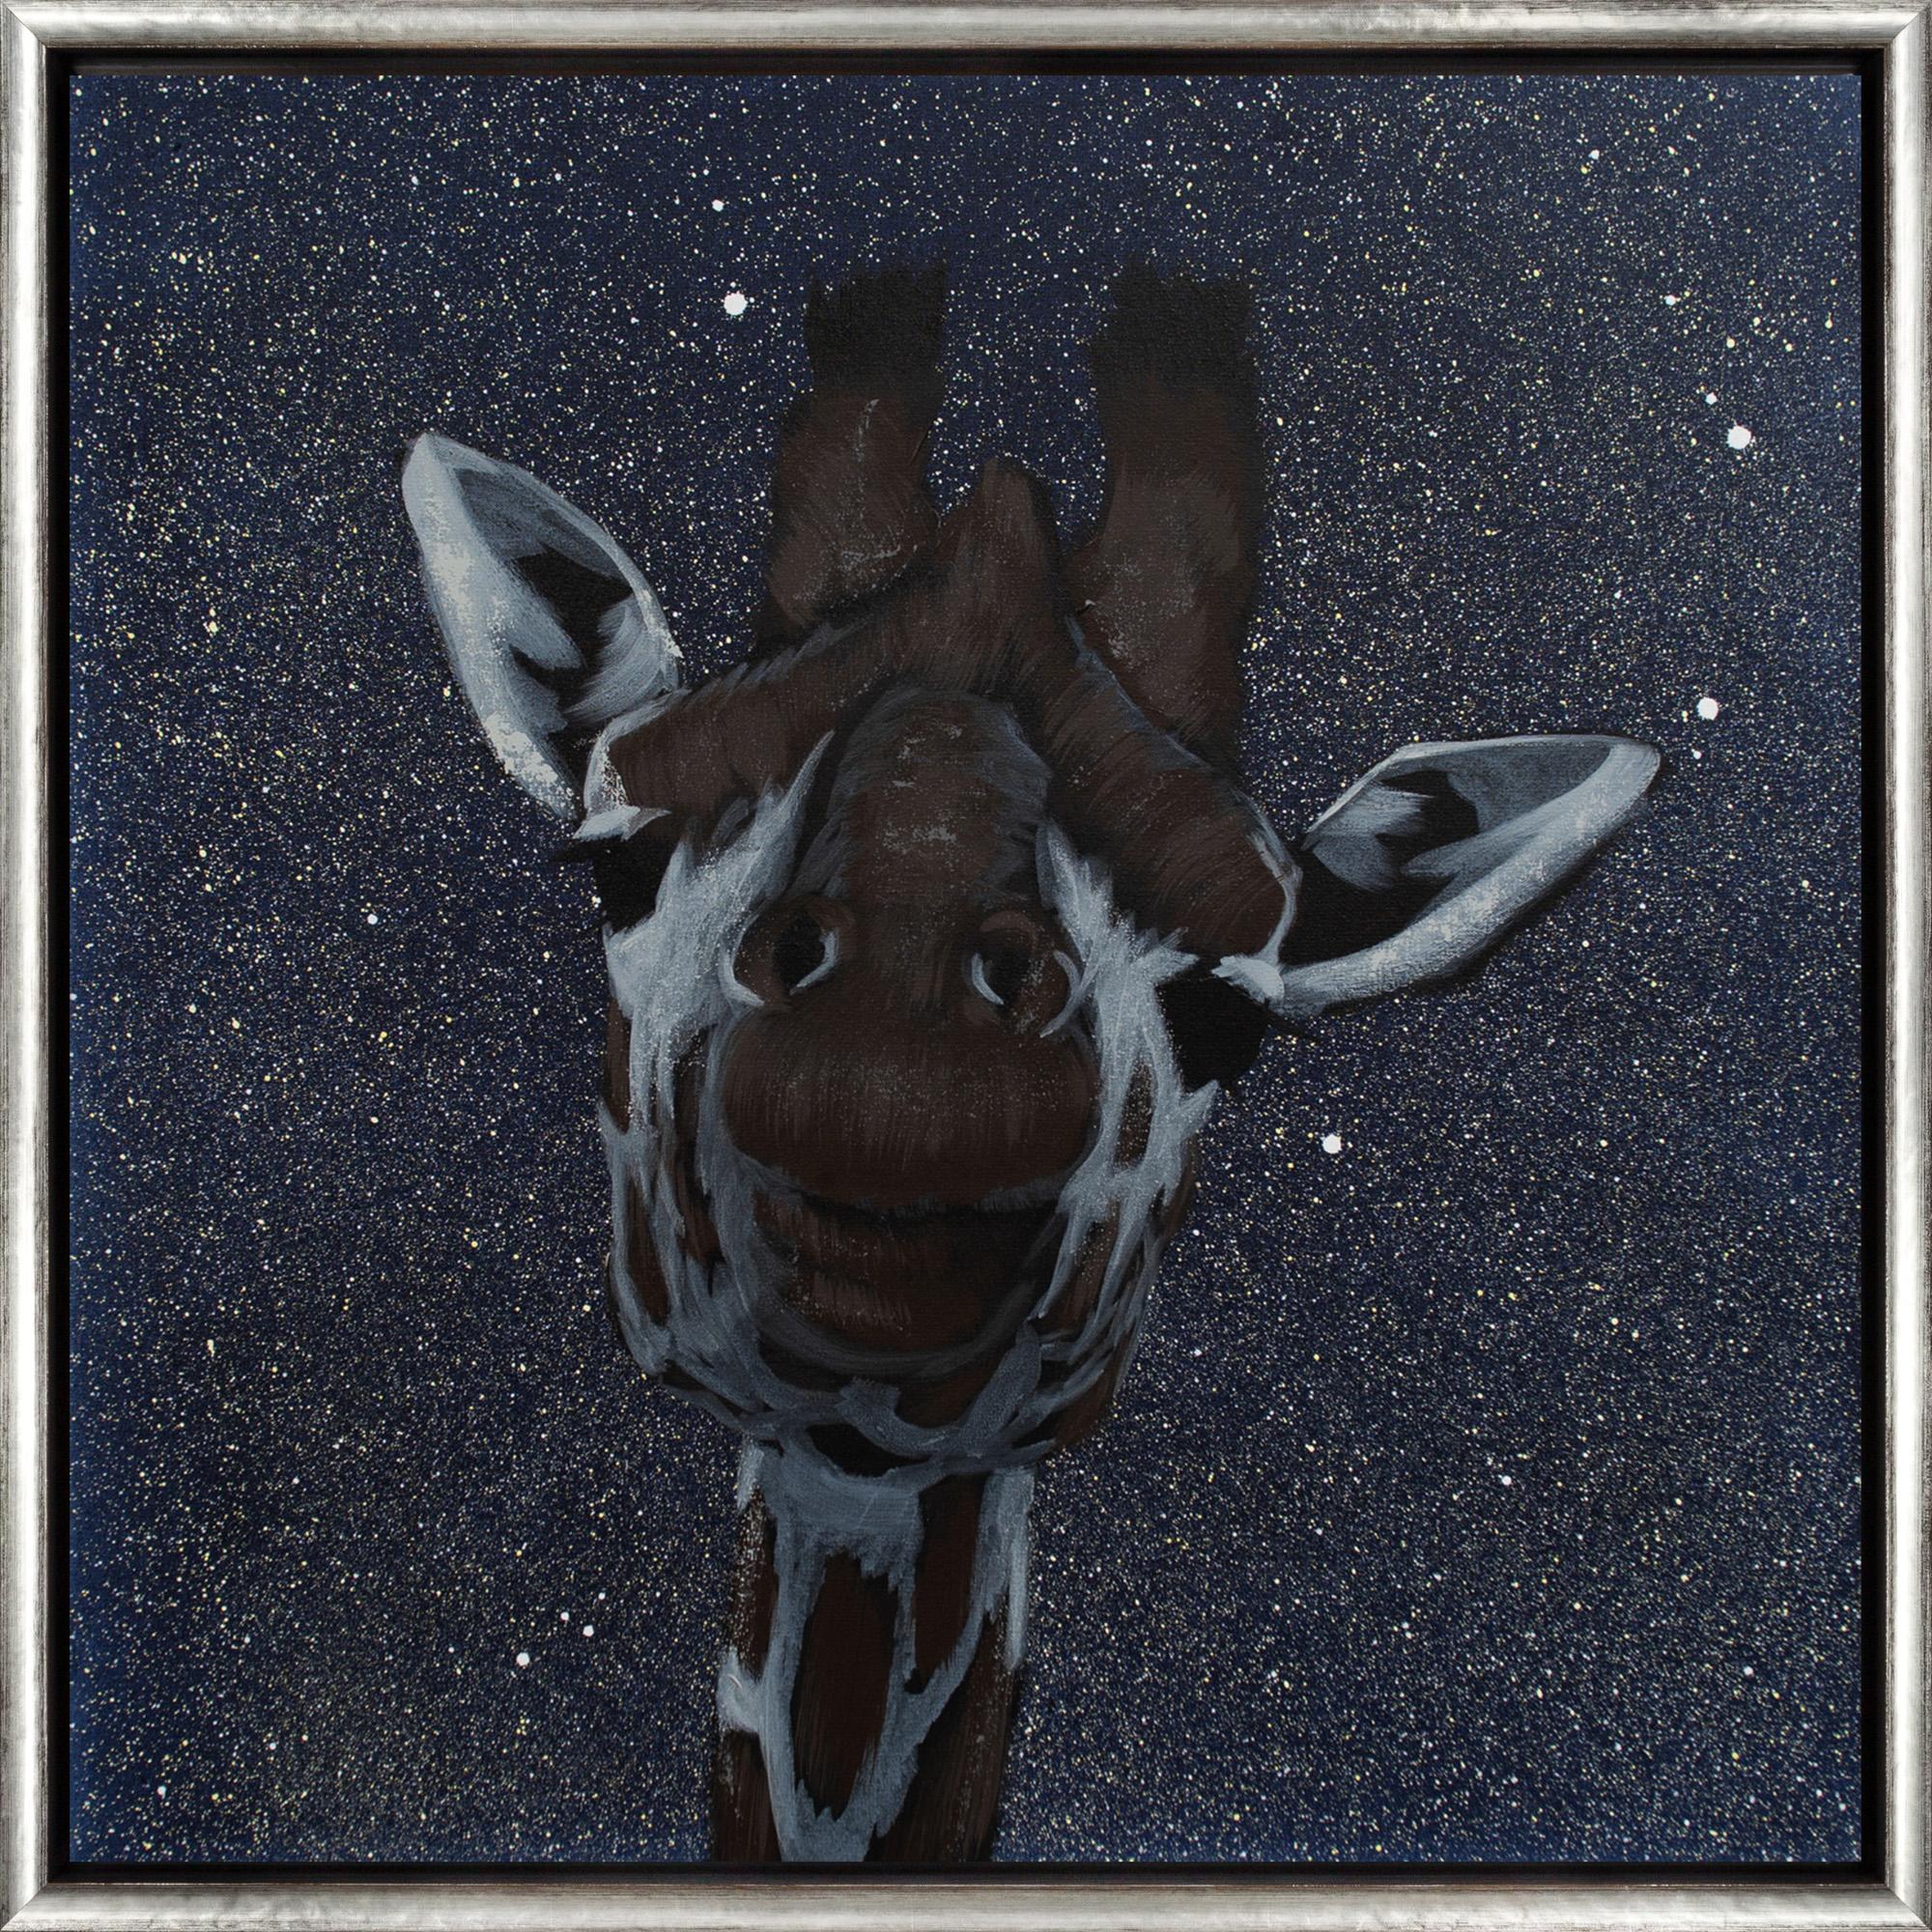 "Giraffe On Night" is a framed oil and acrylic work on canvas by Joshua Brown, depicting a giraffe's head looking directly at the viewer. This playful painting features painterly brushstrokes that evoke the texture of the cow's fur amidst a